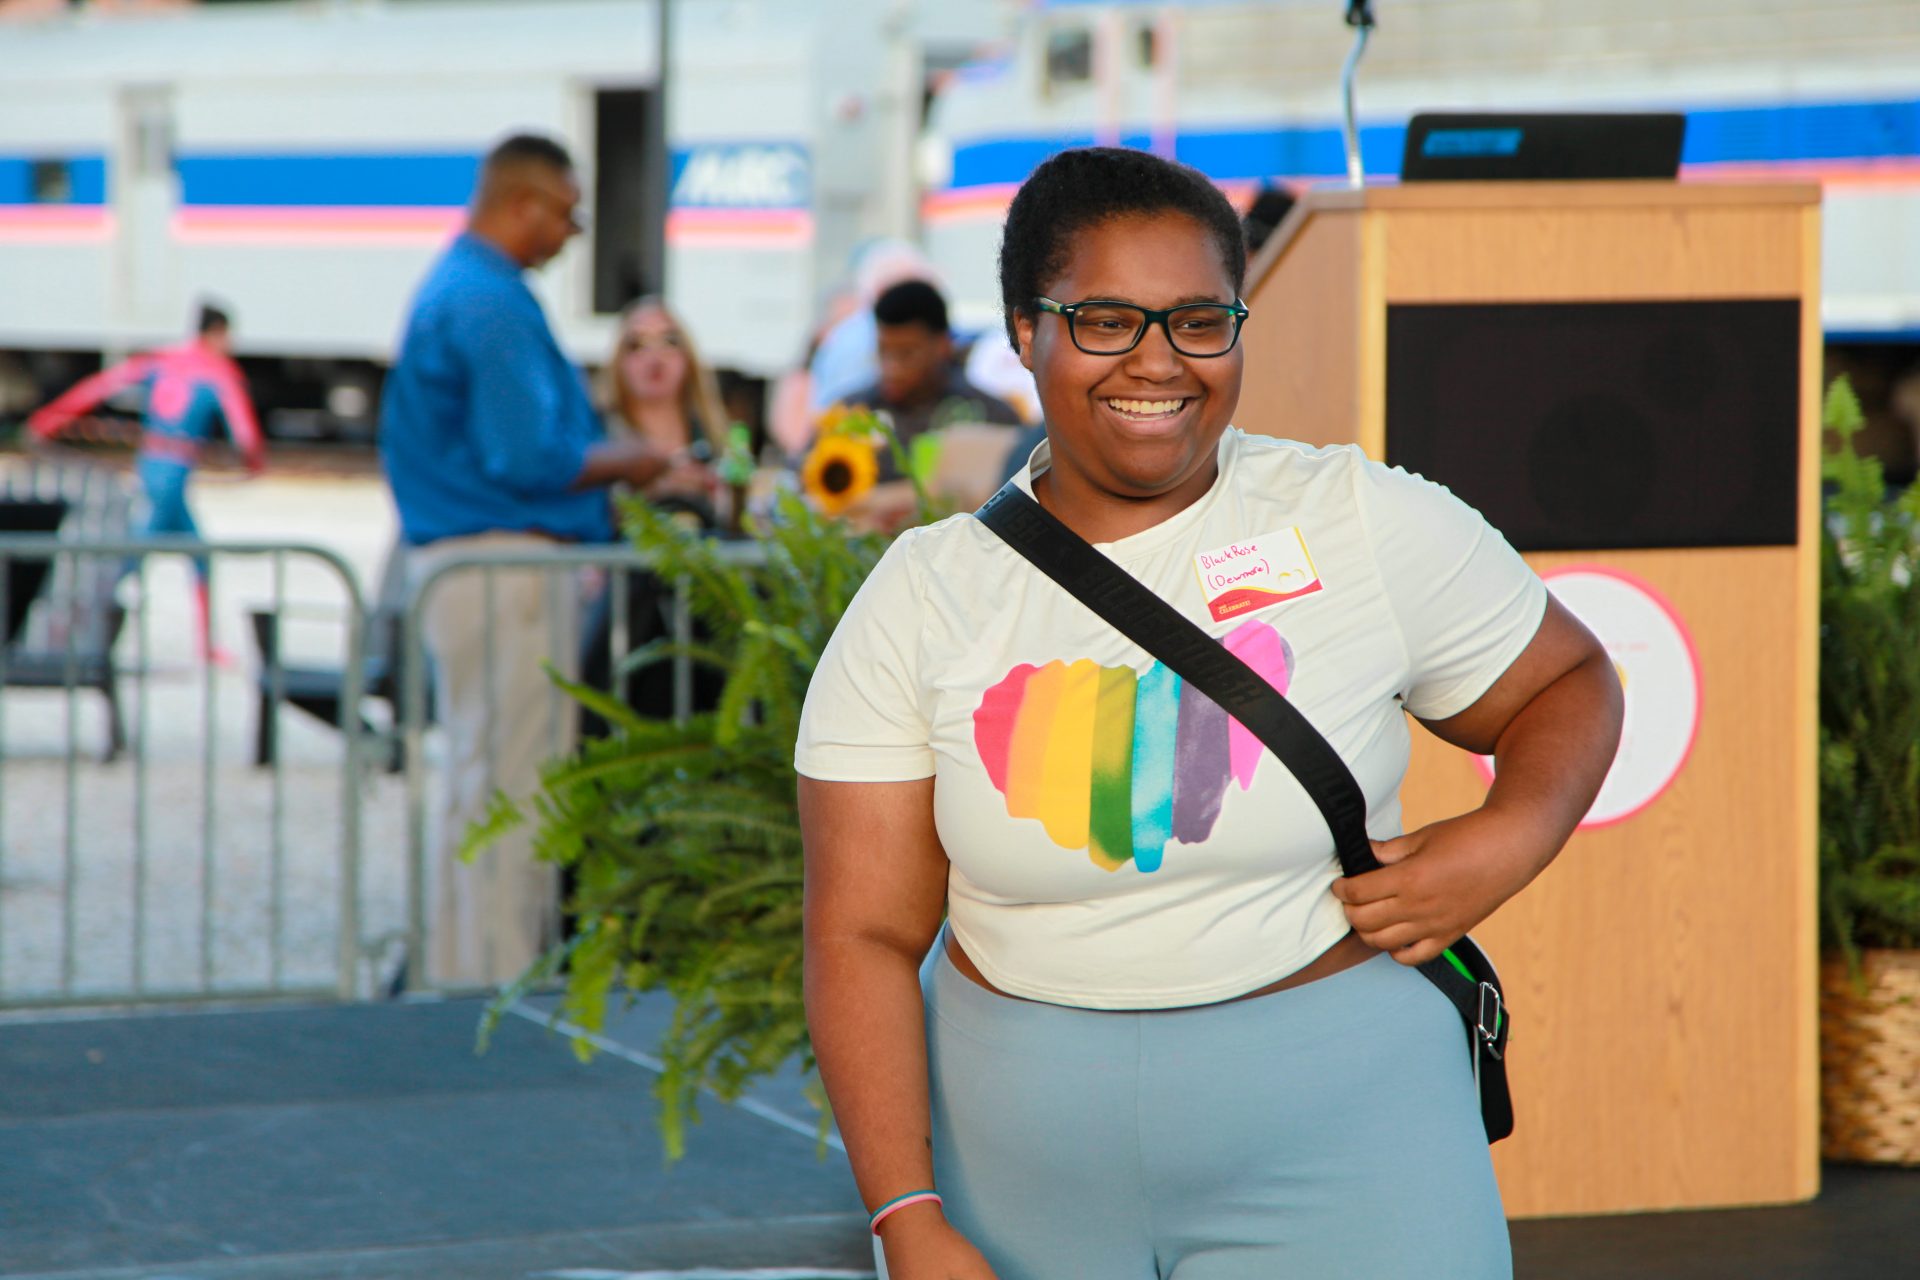 A young Black woman in a white t-shirt with a rainbow heart poses for the camera after reciting a poem